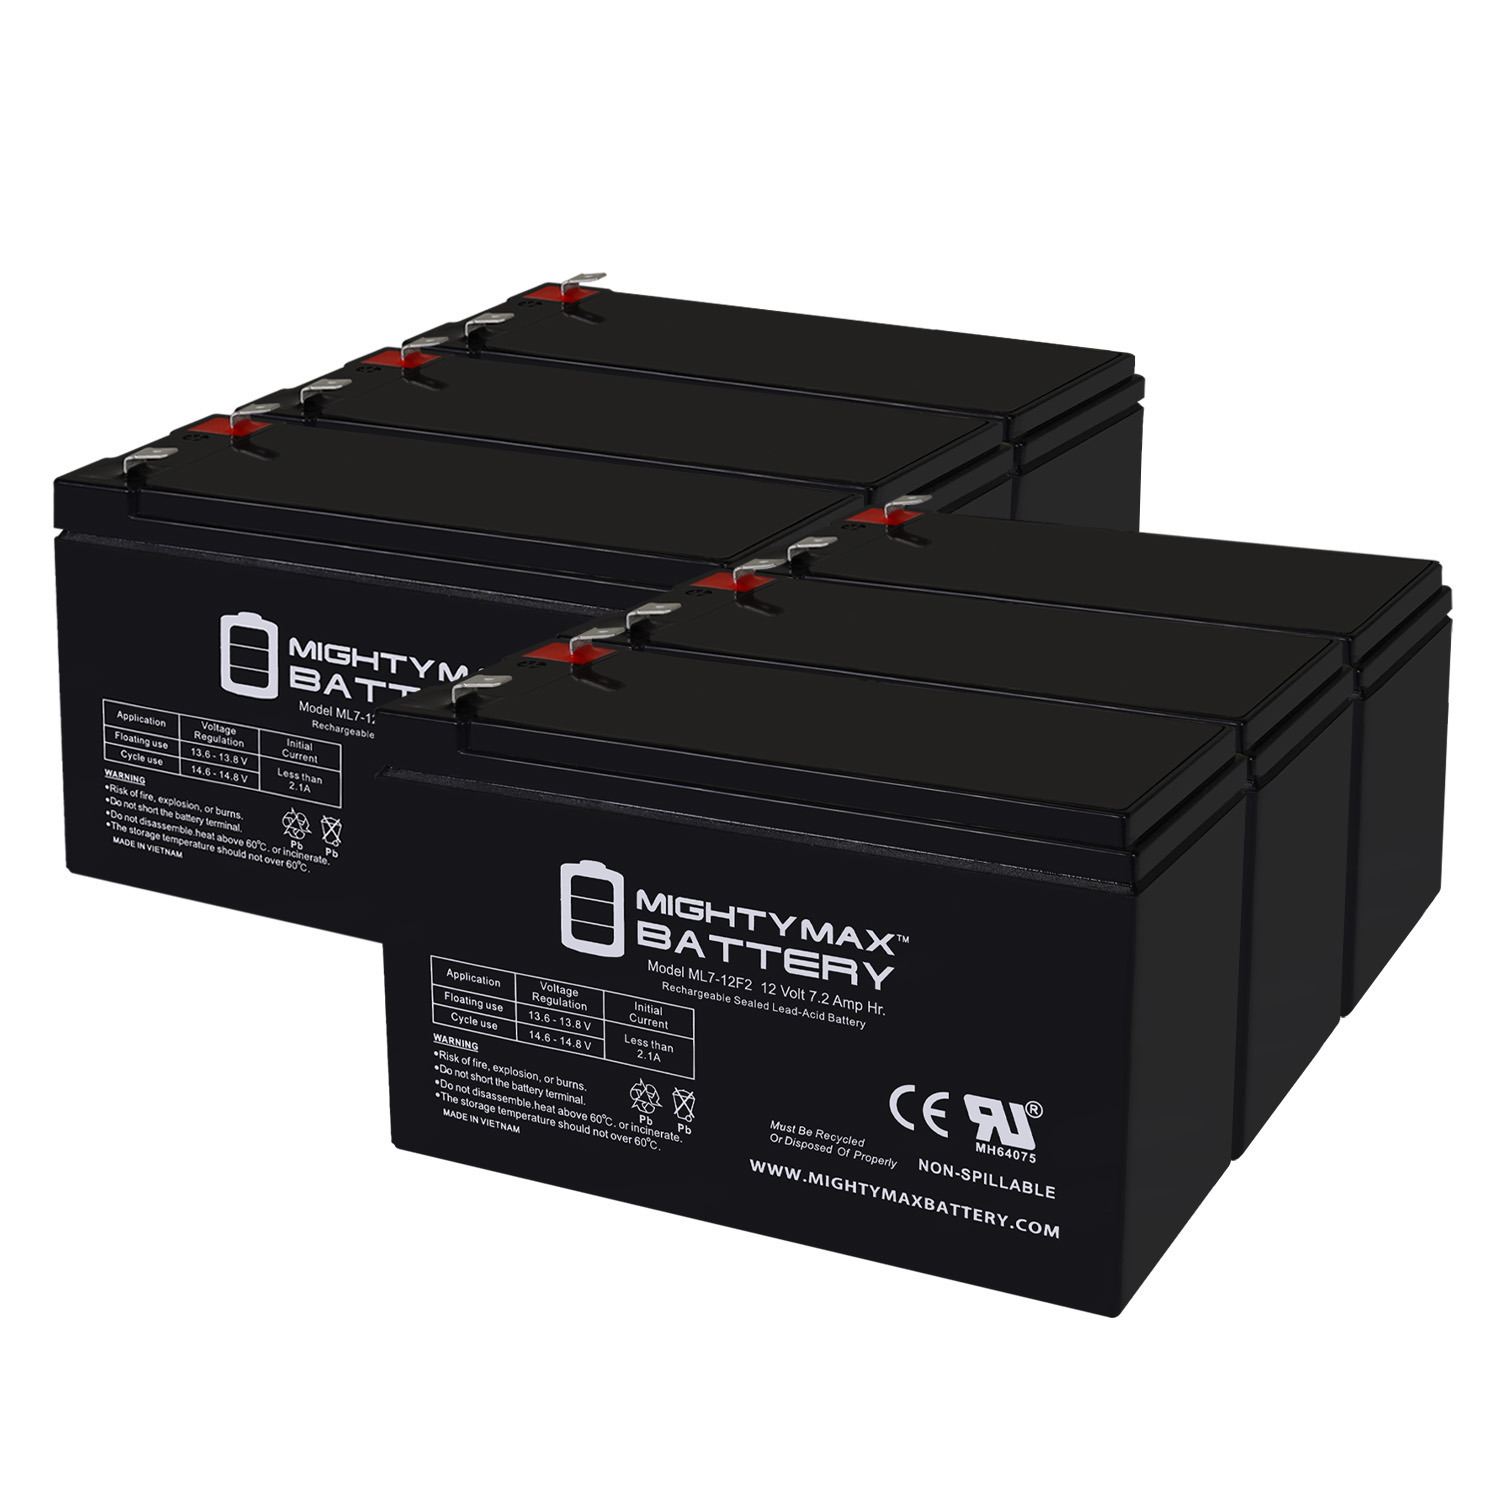 12V 7Ah F2 Replacement Battery for High Temp Razor E300 - 6 Pack